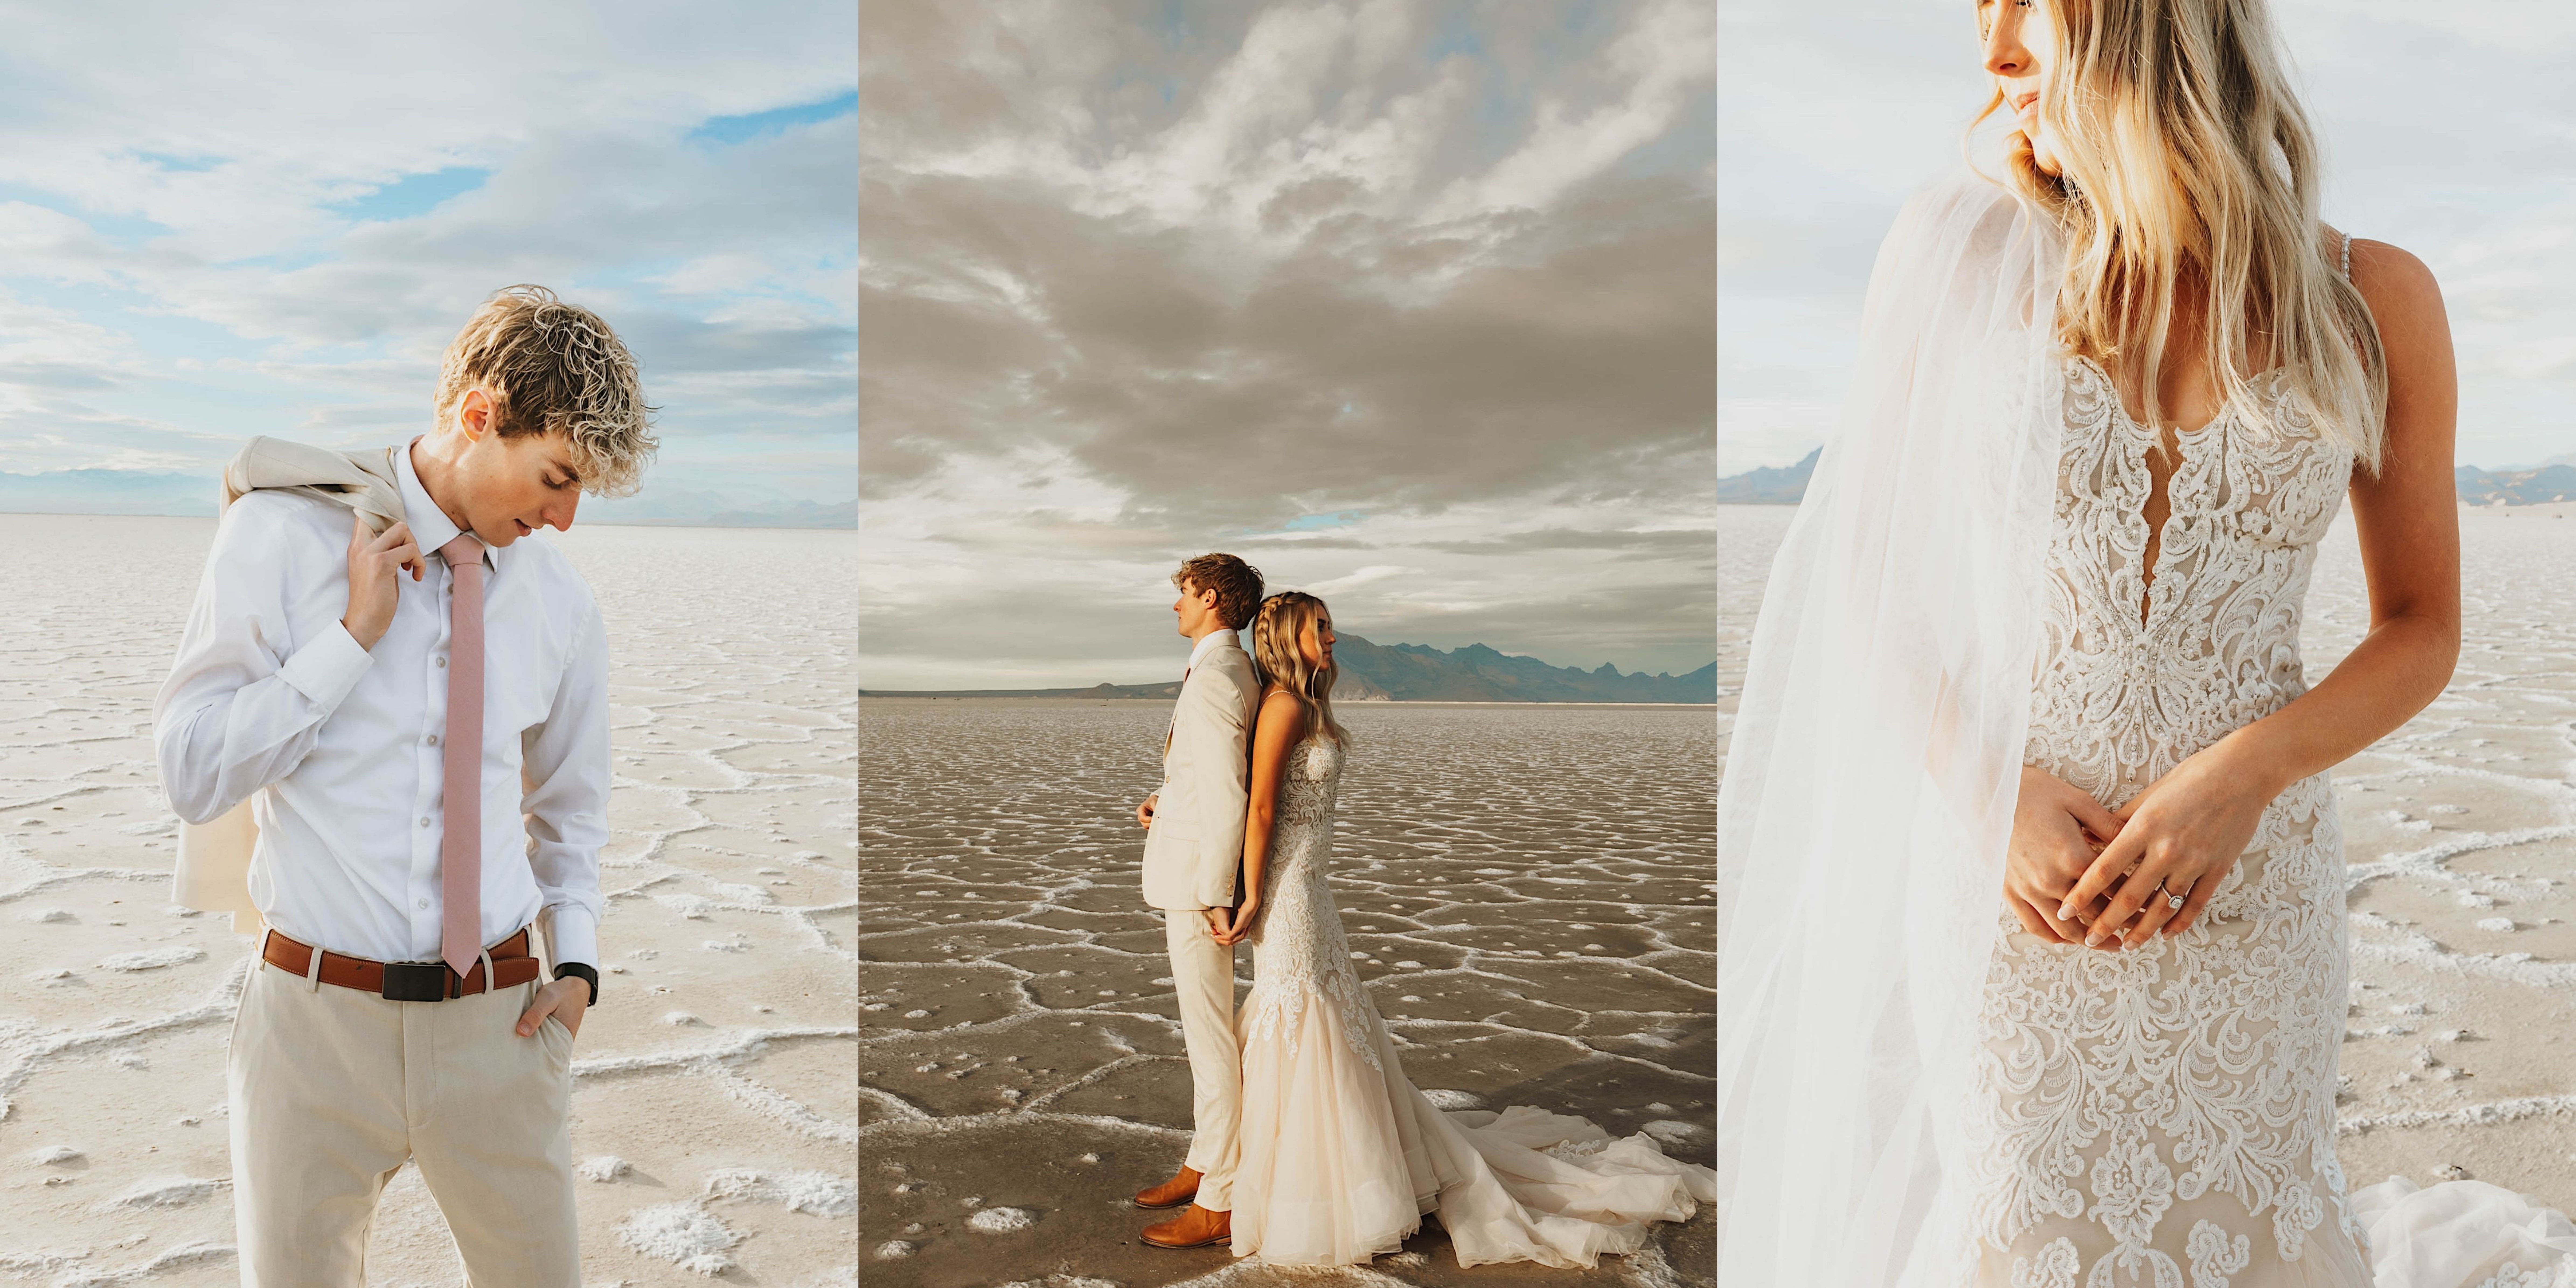 3 photos side by side, the left is of a groom holding his suit coat over his shoulder and looking at the ground, the middle photo of is of the groom and a bride standing back to back and holding hands, the right is of the bride holding her hands and looking left, each photo was taken in the Utah Salt Flats